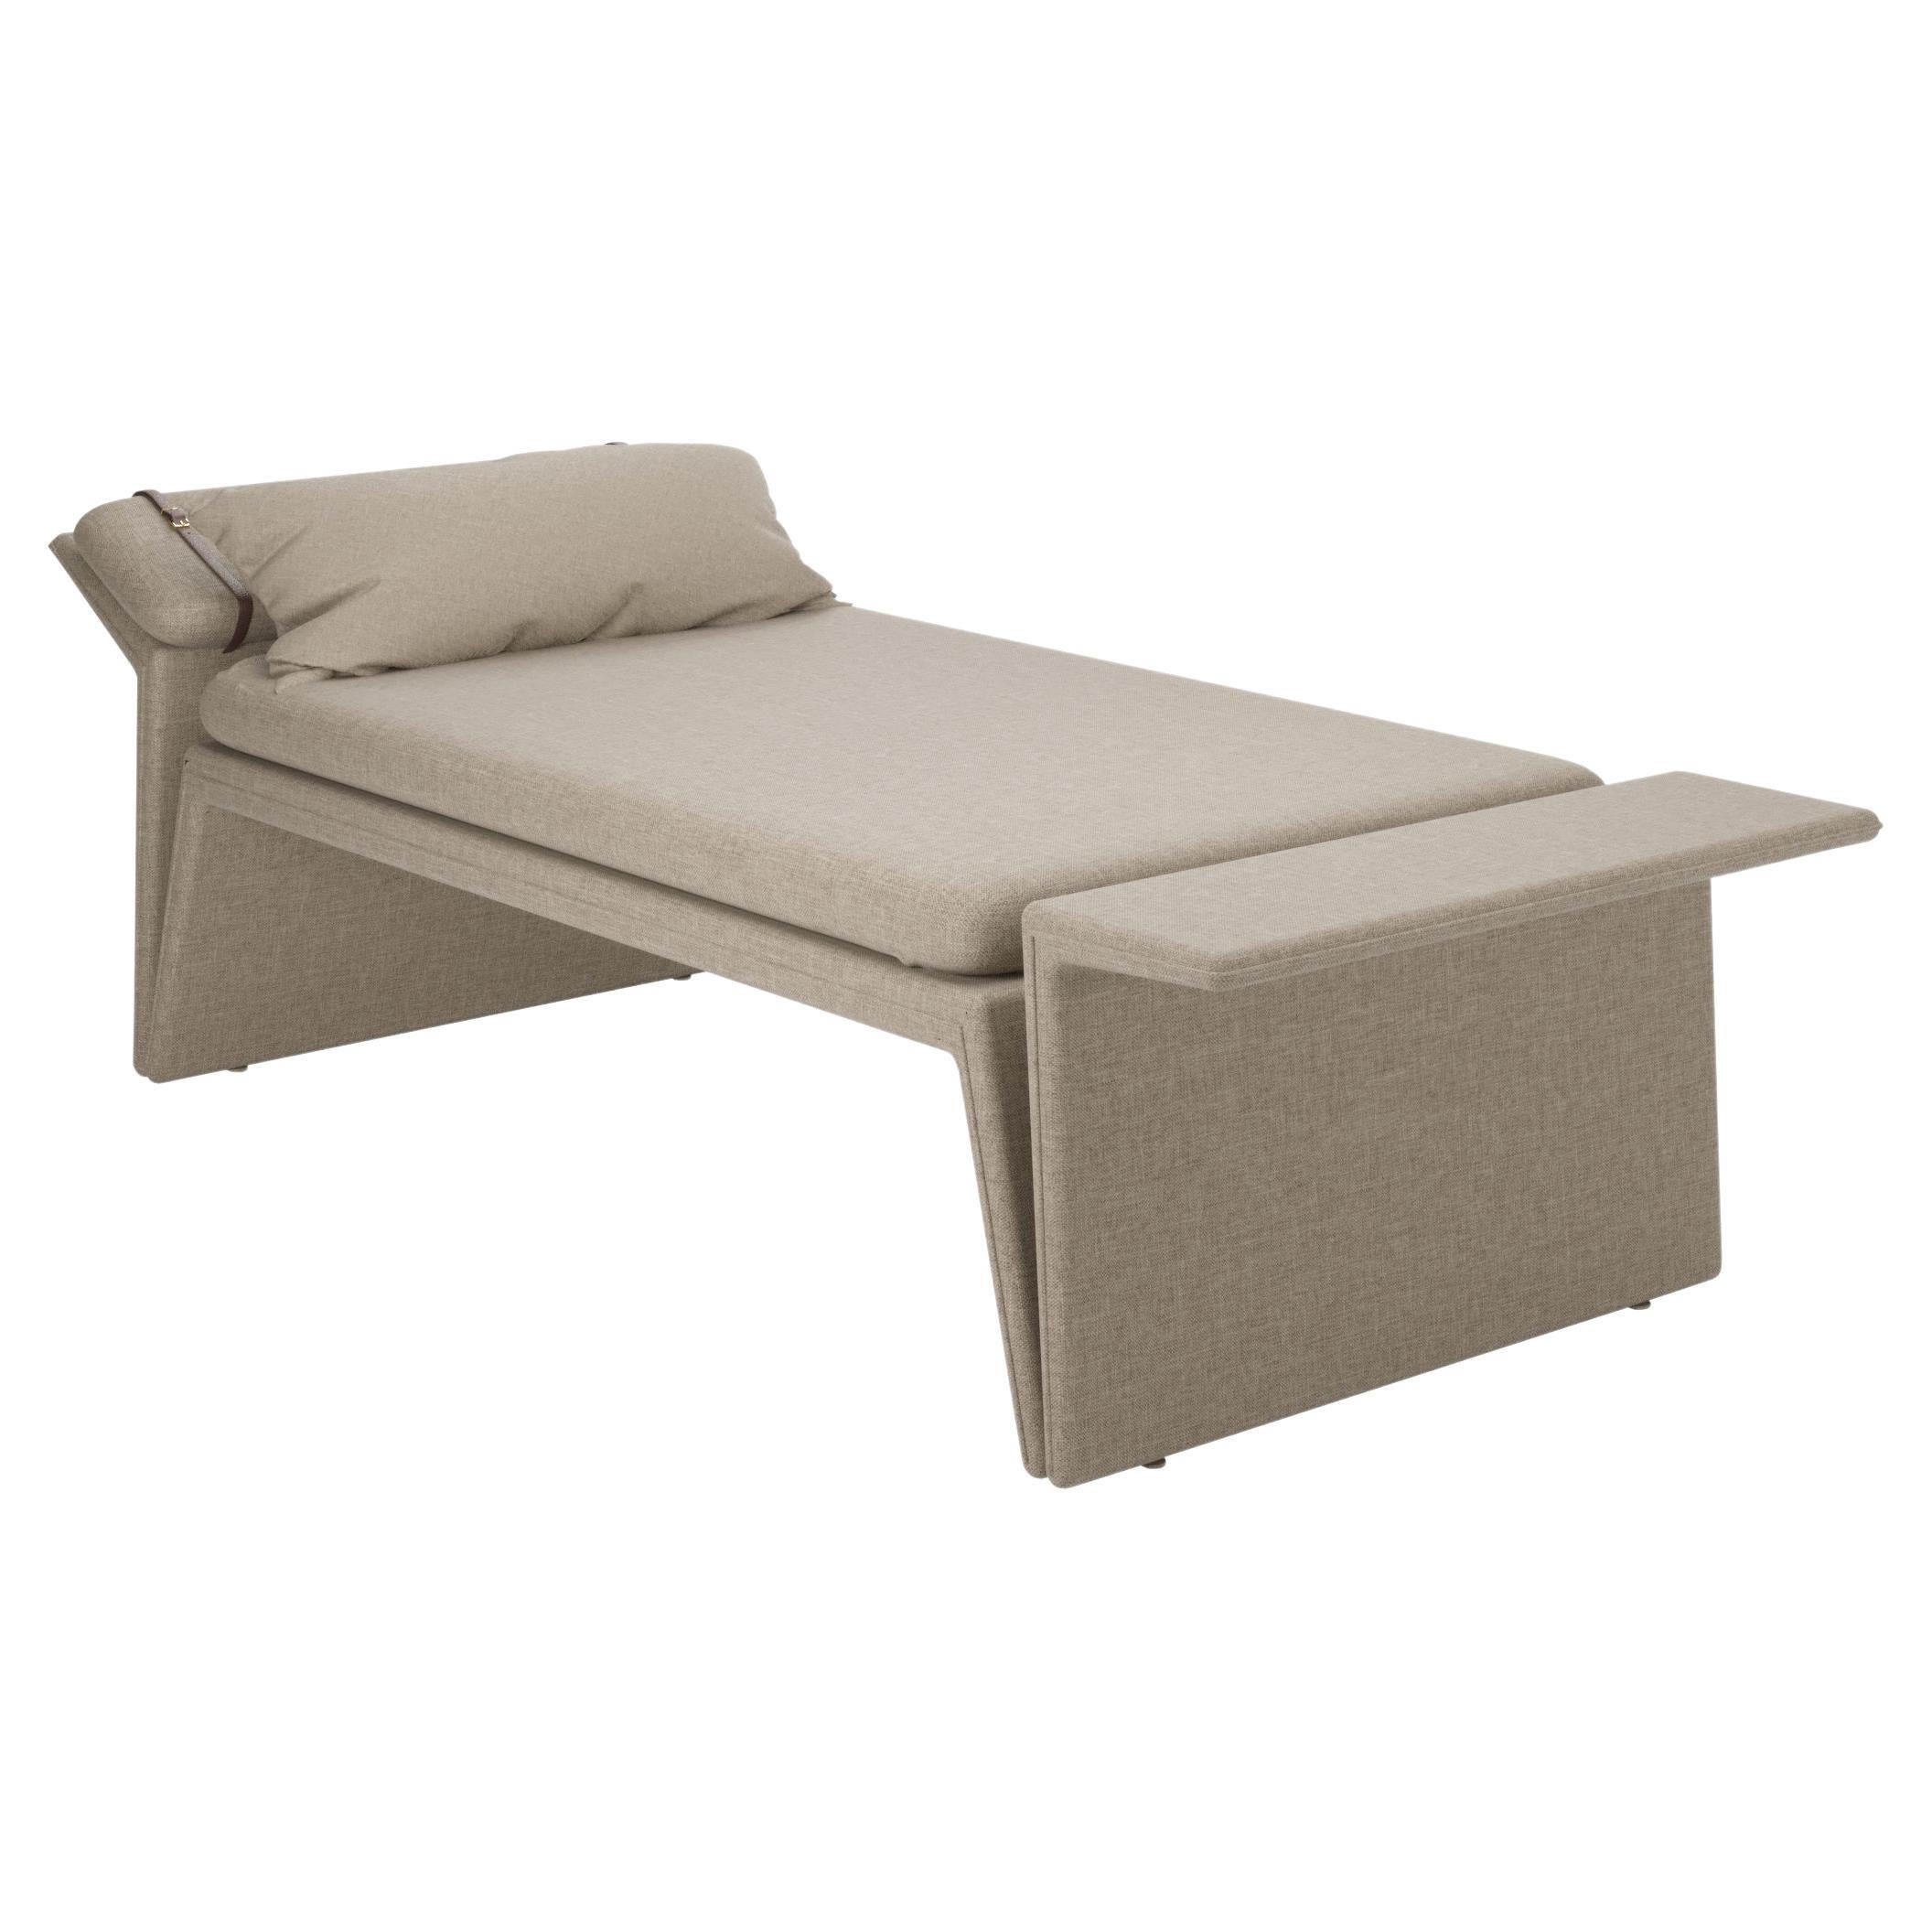 Natural Linen Modern Panama Daybed I For Sale